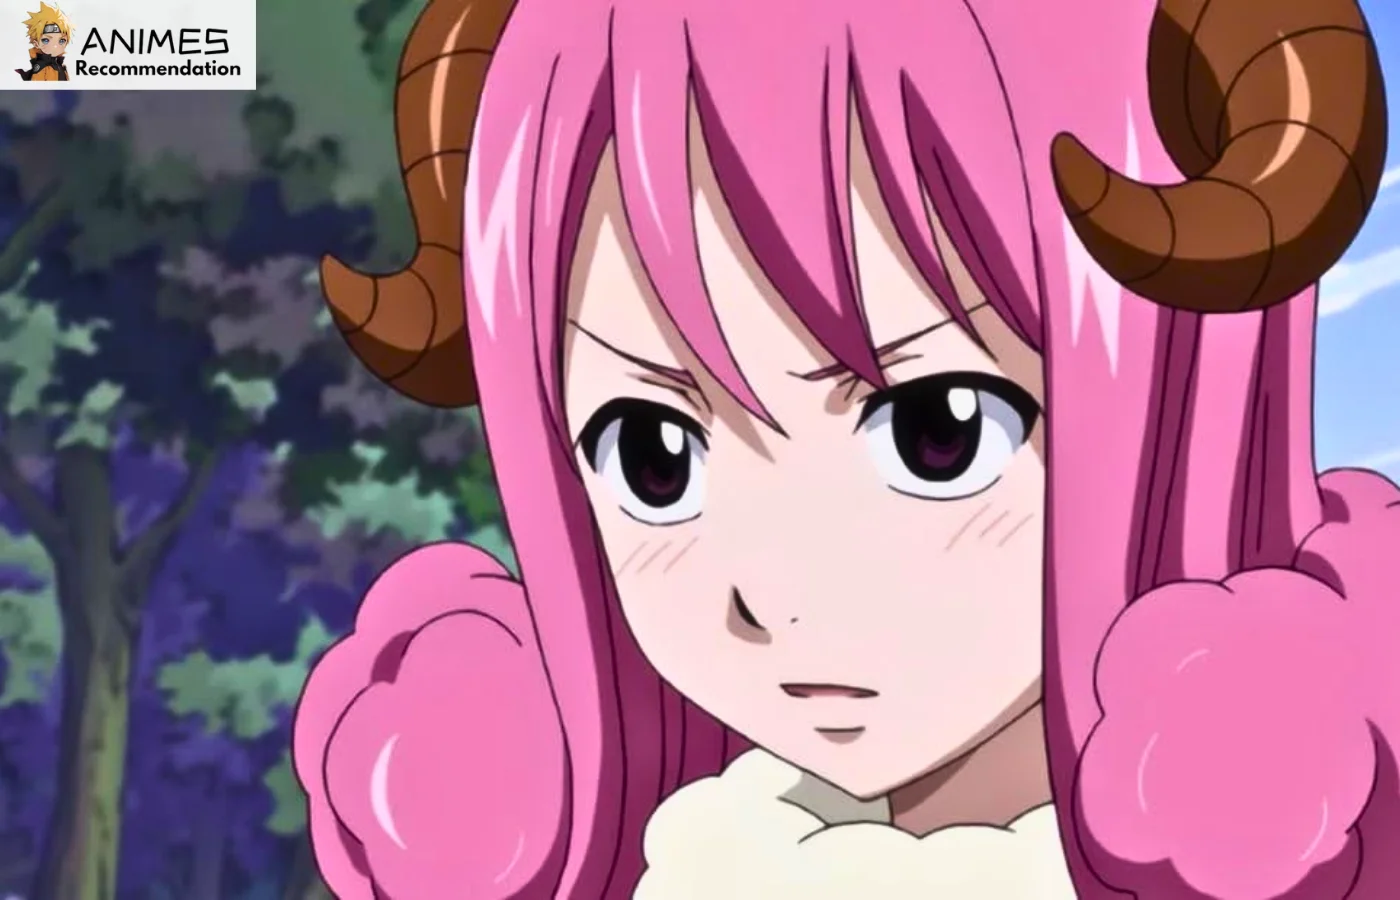 Aries from Fairytail